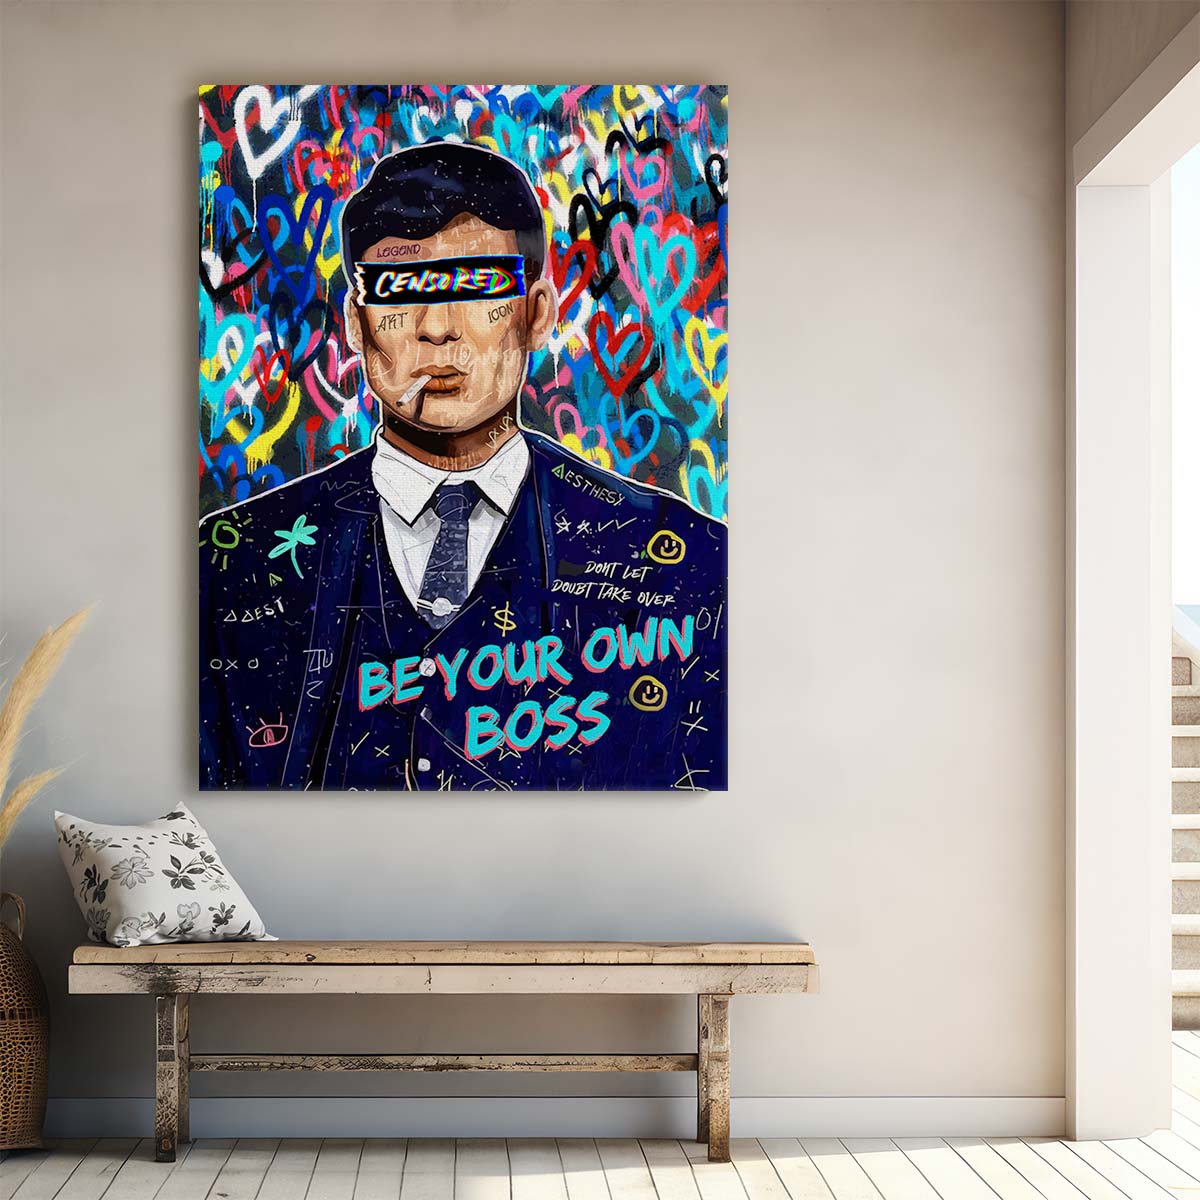 Thomas Shelby Godfather Graffiti Wall Art by Luxuriance Designs. Made in USA.